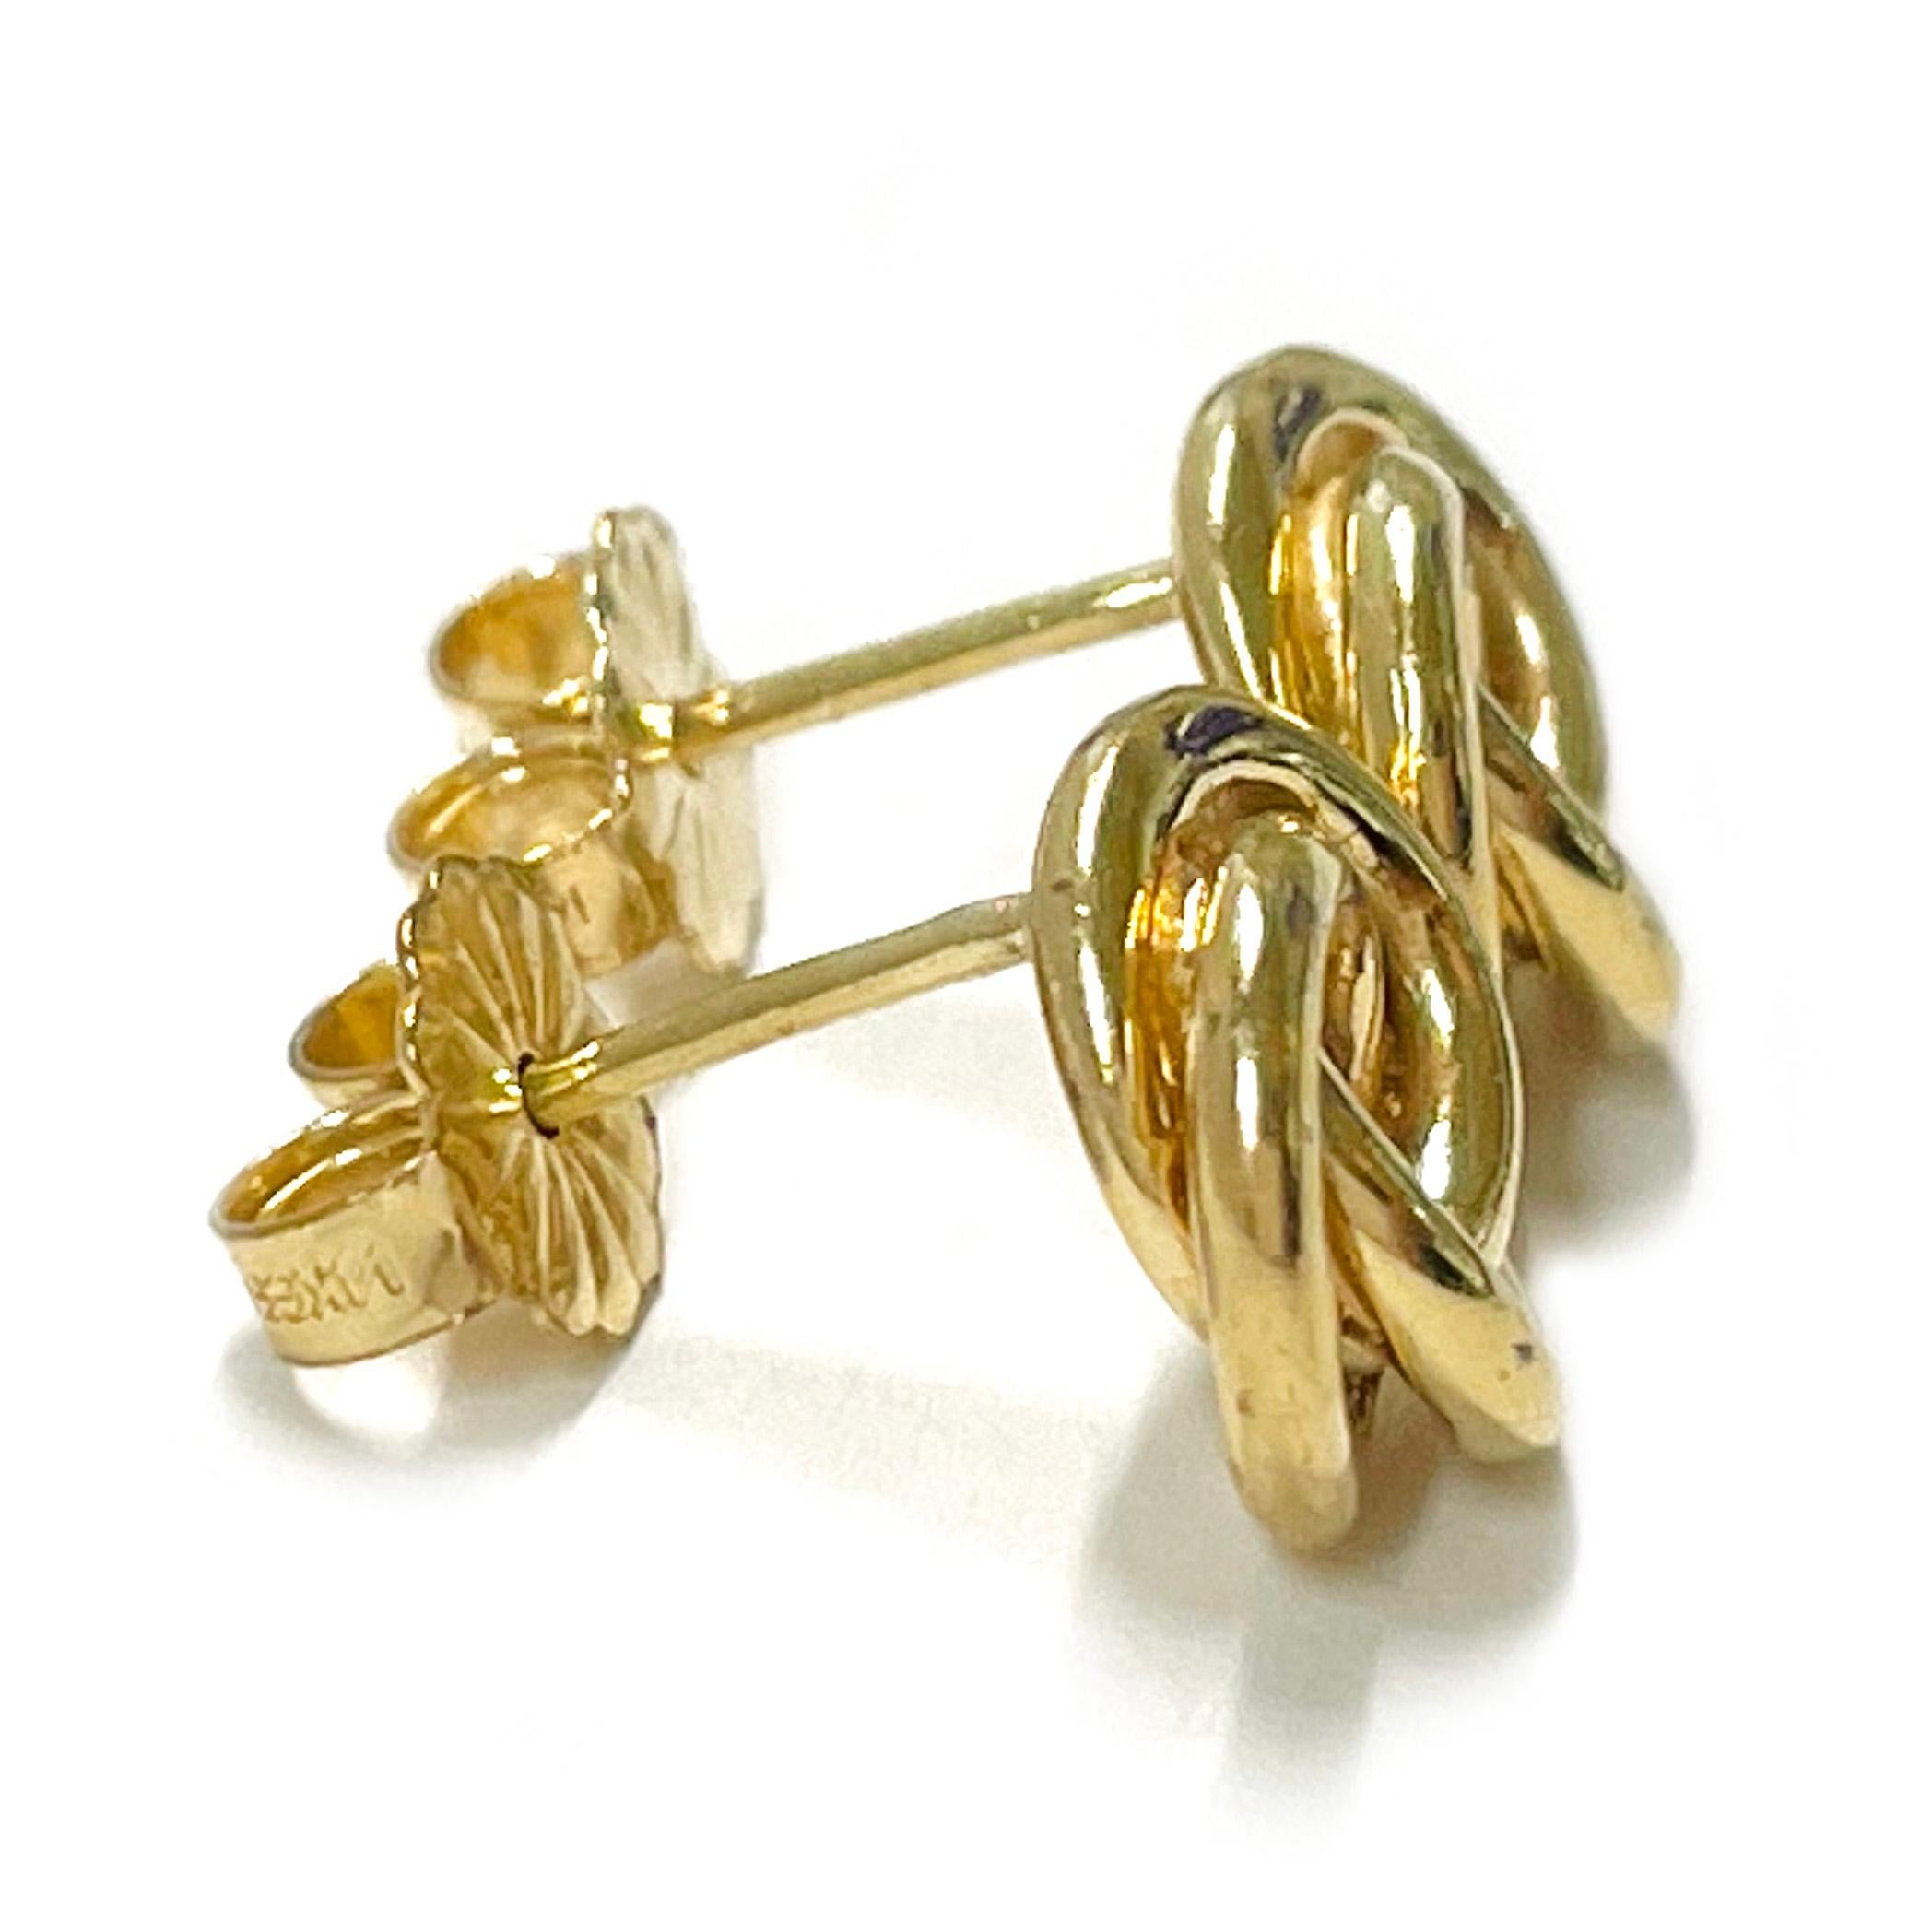 14 Karat Yellow Gold Circle Swirl Stud Earrings. Each earring features a continuous gold tube set in a swirl of circles. The earrings measure approximately 8.7mm x 9.1mm in diameter and have a 14 Karat push back. The total gold weight of the